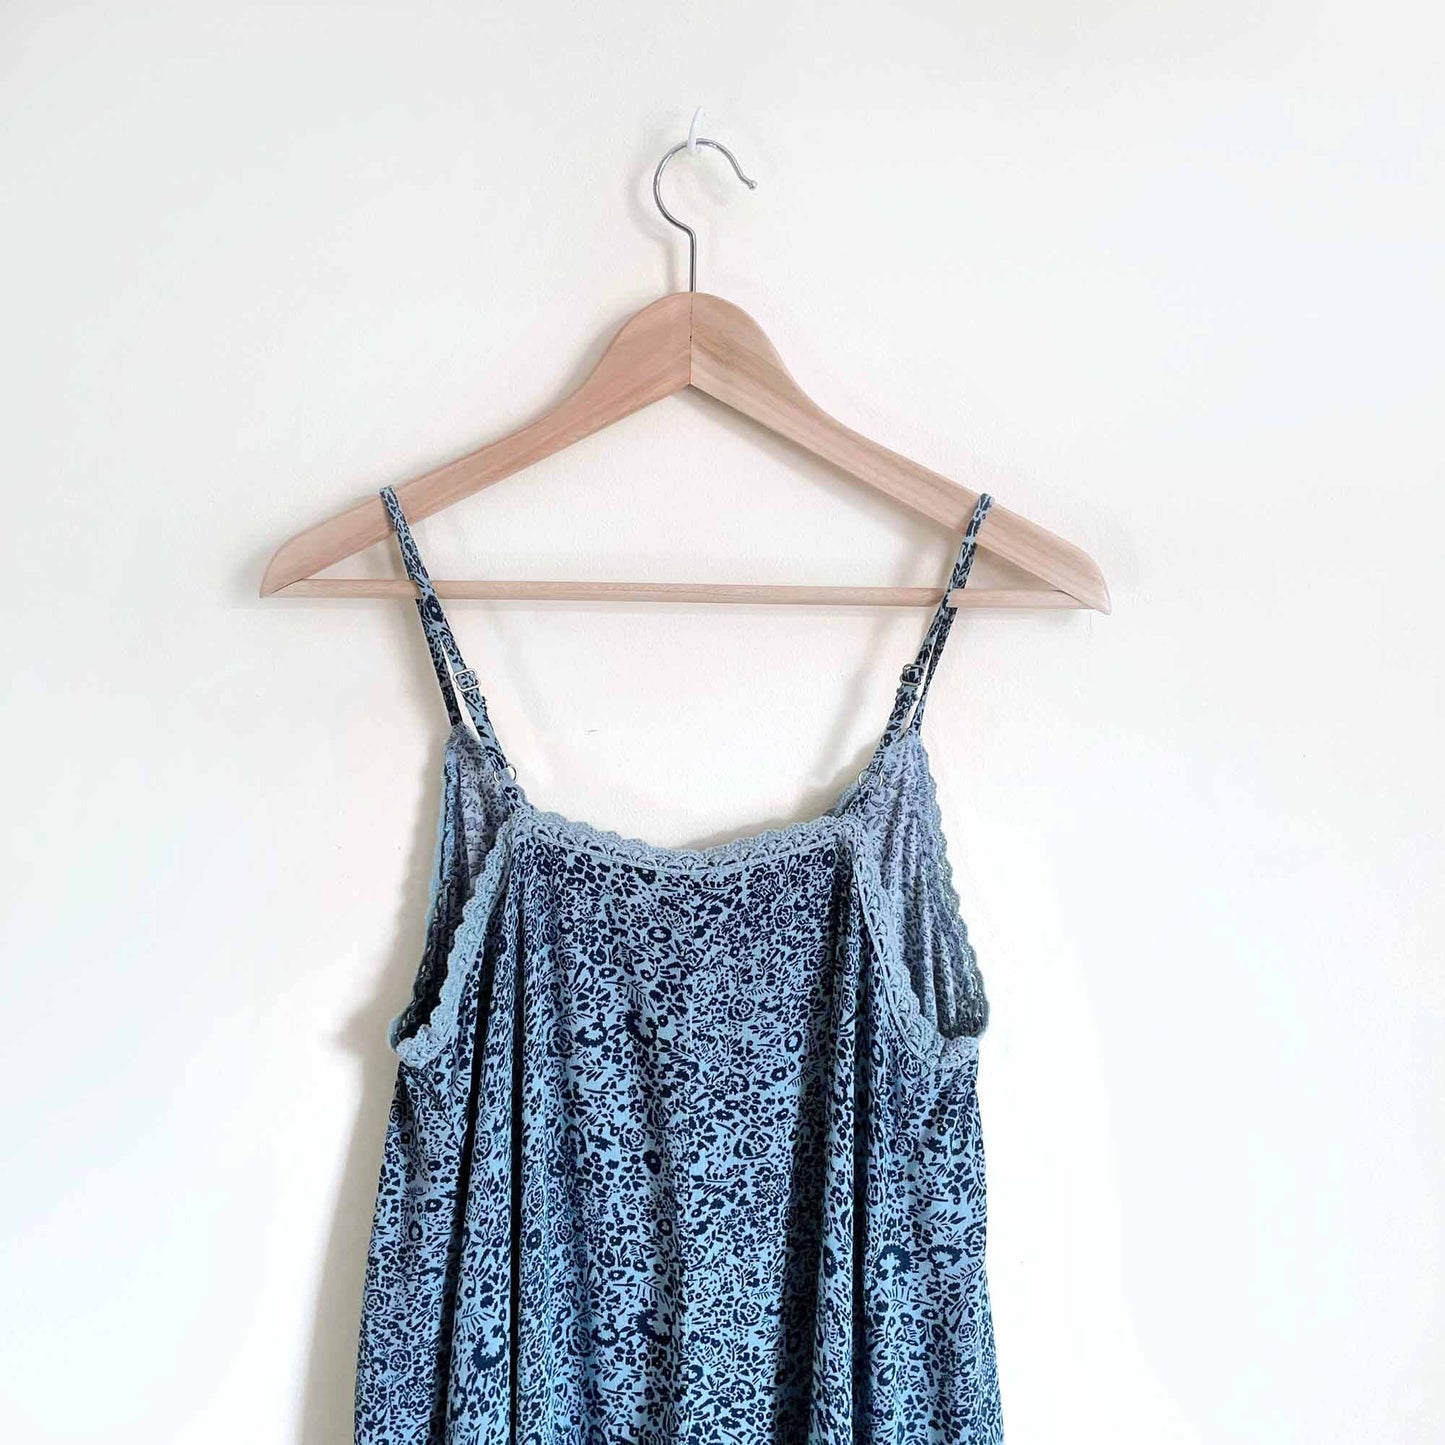 Harlow floral slip dress with crochet lace trim - size Small